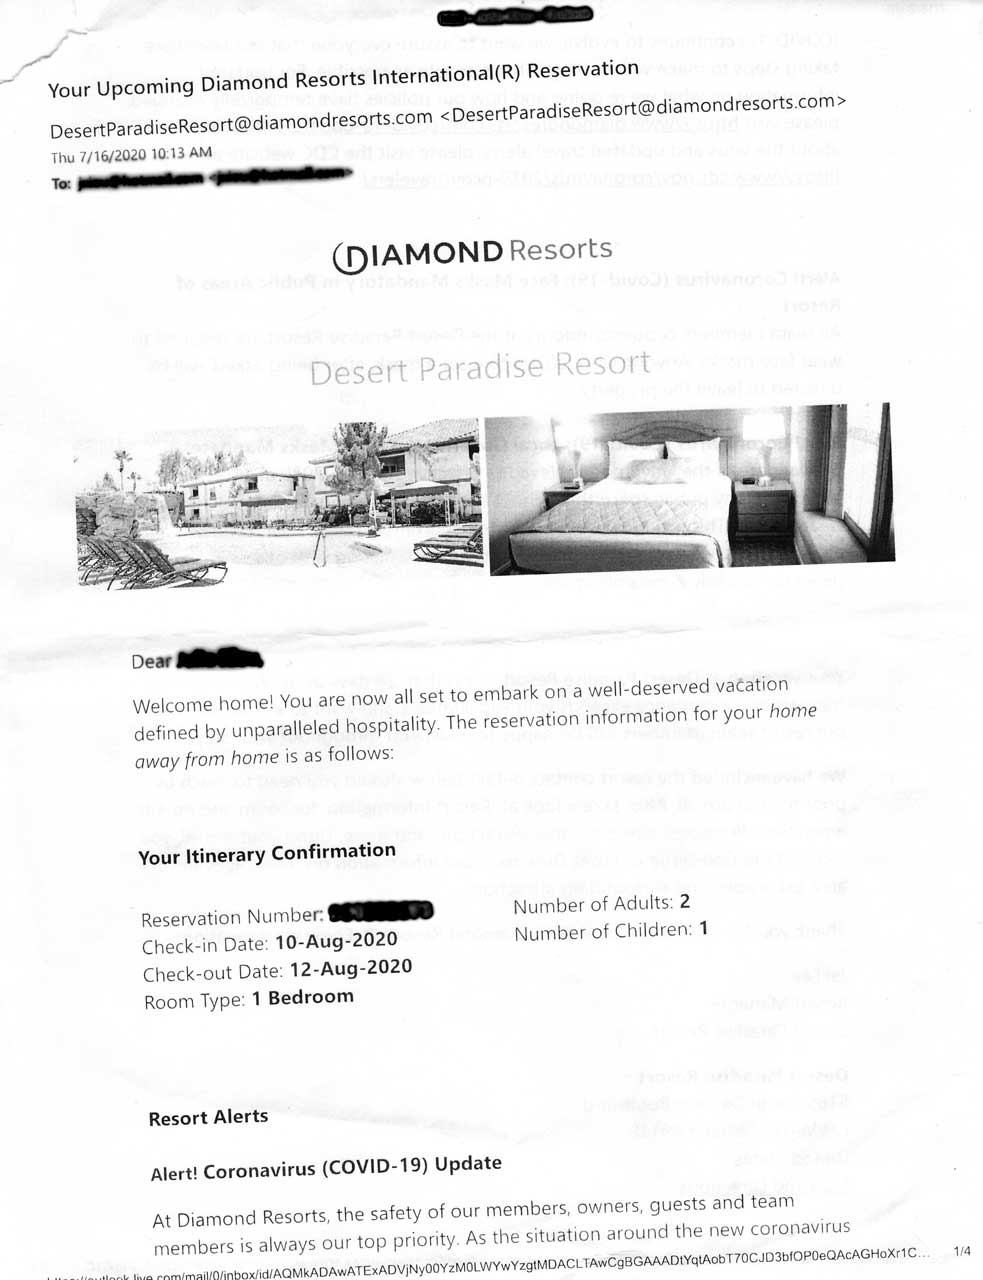 Regardless of whether we use Booking.com or not, we always print out each of our confirmations. This one was from Expedia.com, but their confirmations lacked the tight detail that Booking.com's confirmations had